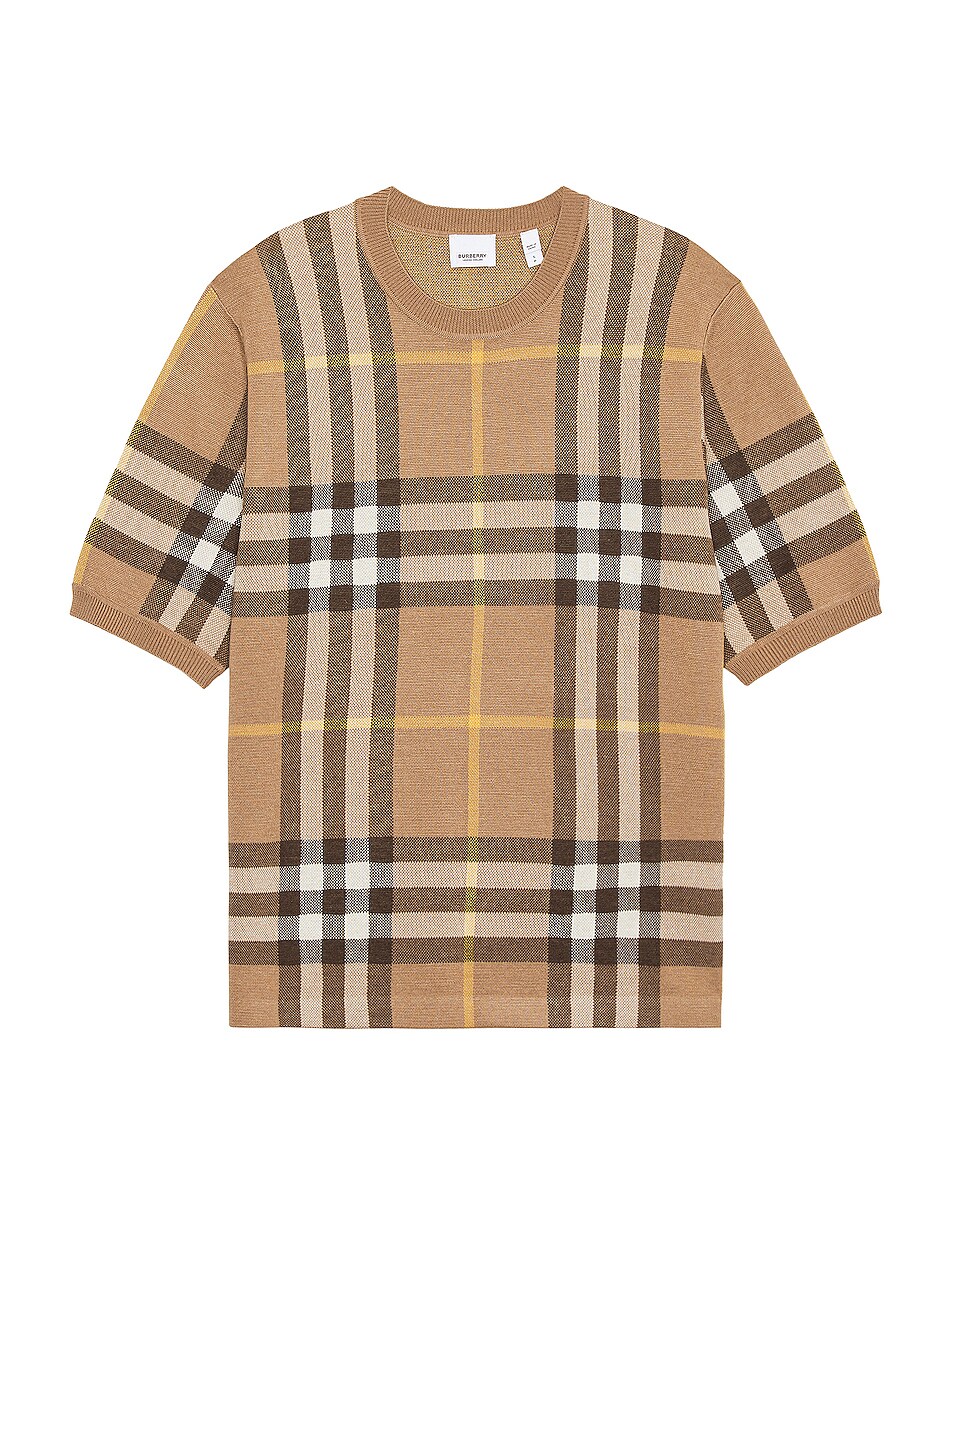 Image 1 of Burberry Wells Top in Truffle Check